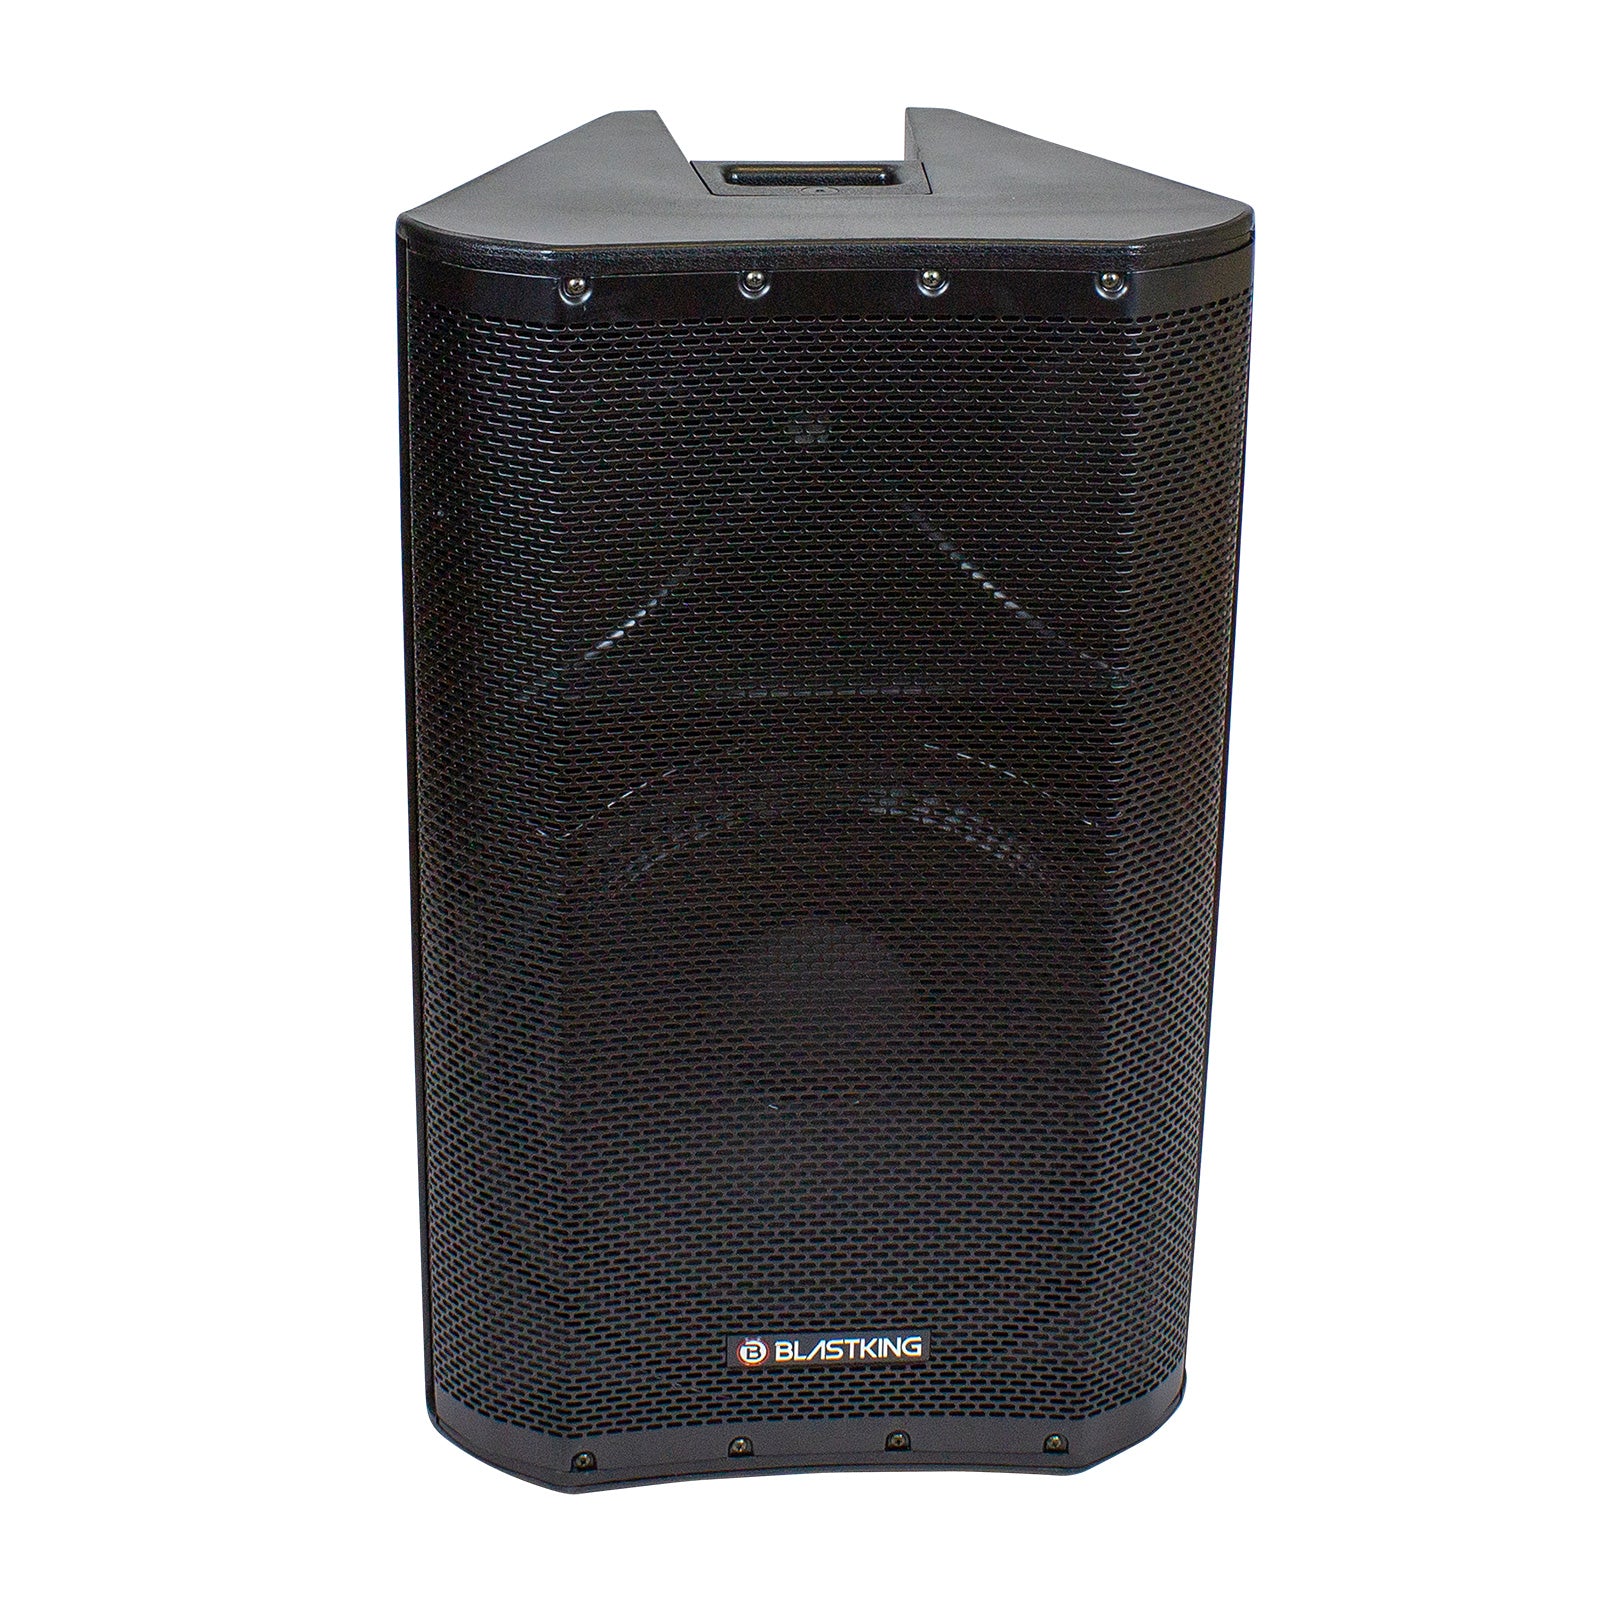 Blastking XS212A 800 Watts 12 inch 2-way Active Loudspeaker w/Bluetooth and MP3 Player